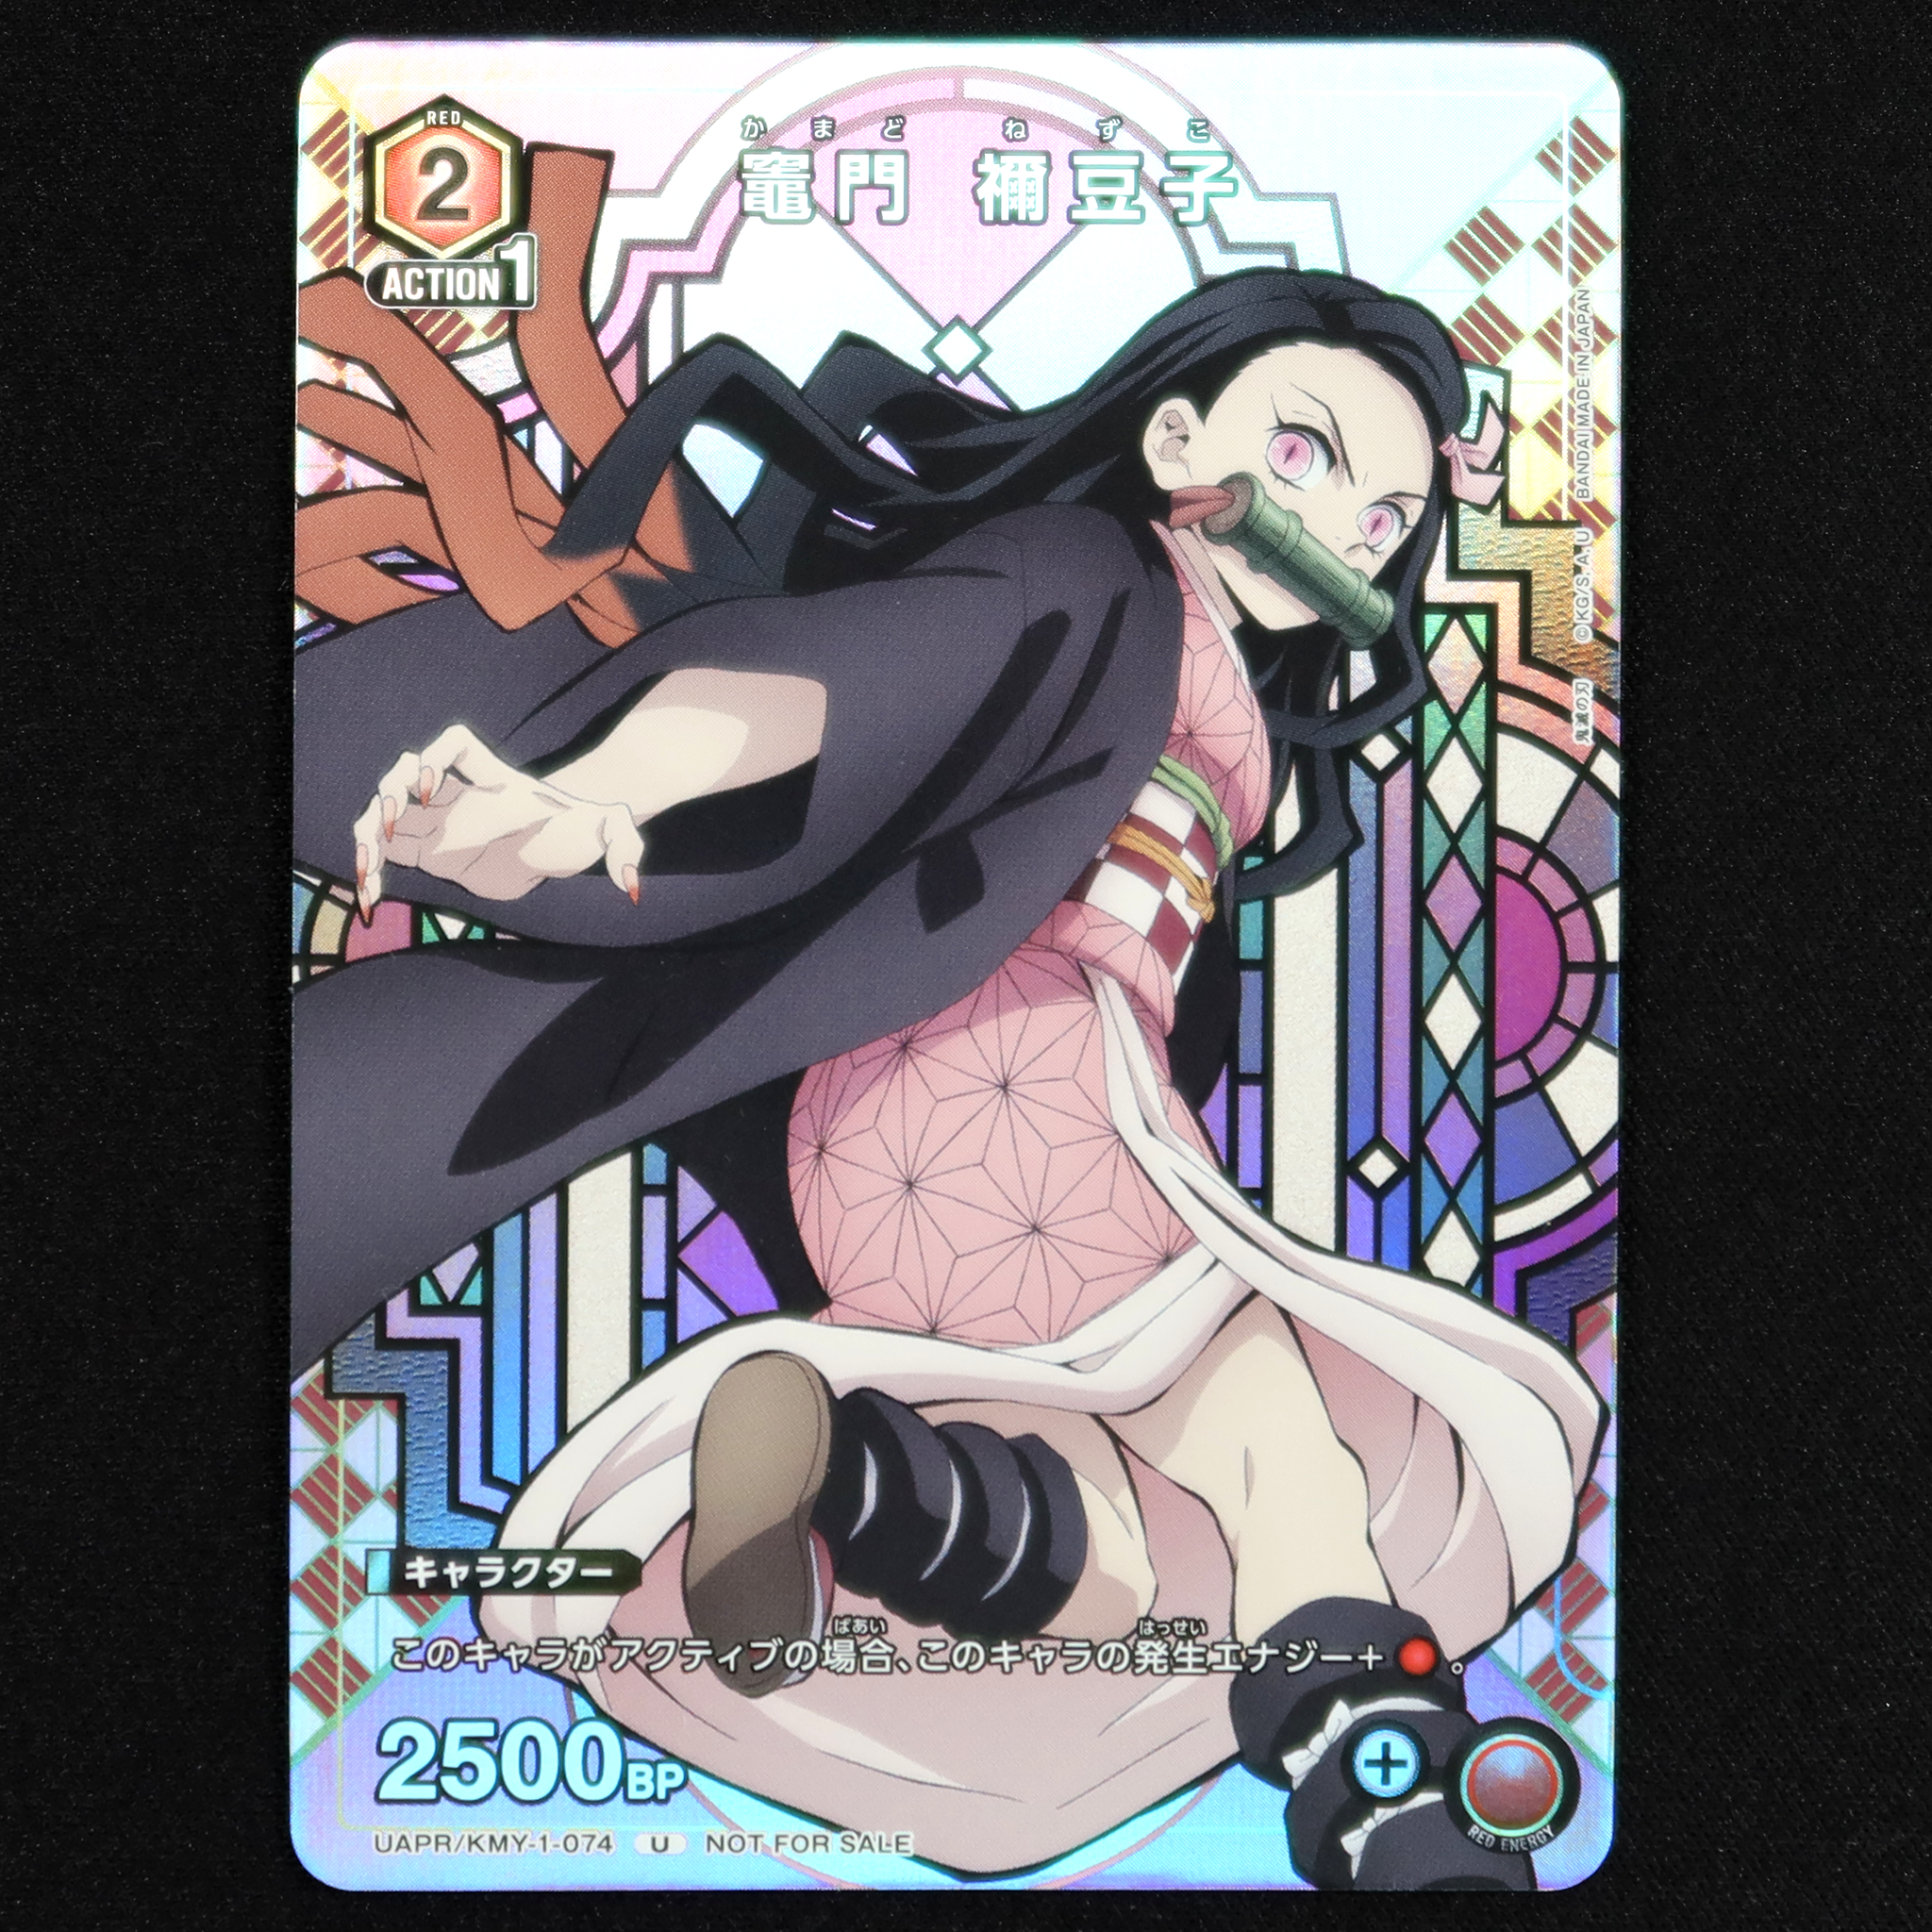 TRADING CARD GAME UNION ARENA UAPR/KMY-1-074  Promotional card sold with the June 2023 issue of VJump magazine released April 21 2023.  Kimetsu no Yaiba - Kamado Nezuko